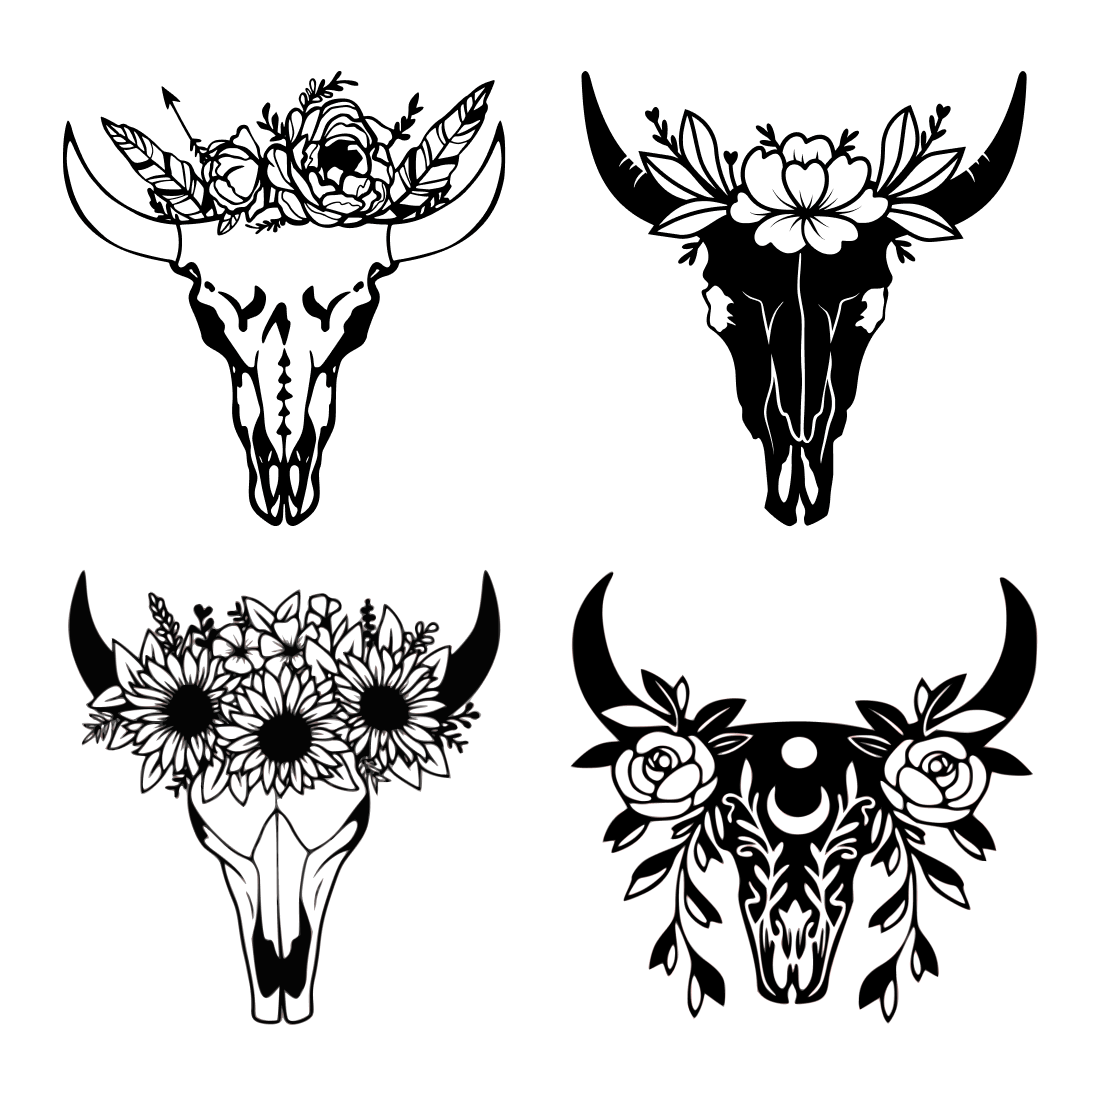 Cow skulls with huge horns are decorated with black and white flowers.